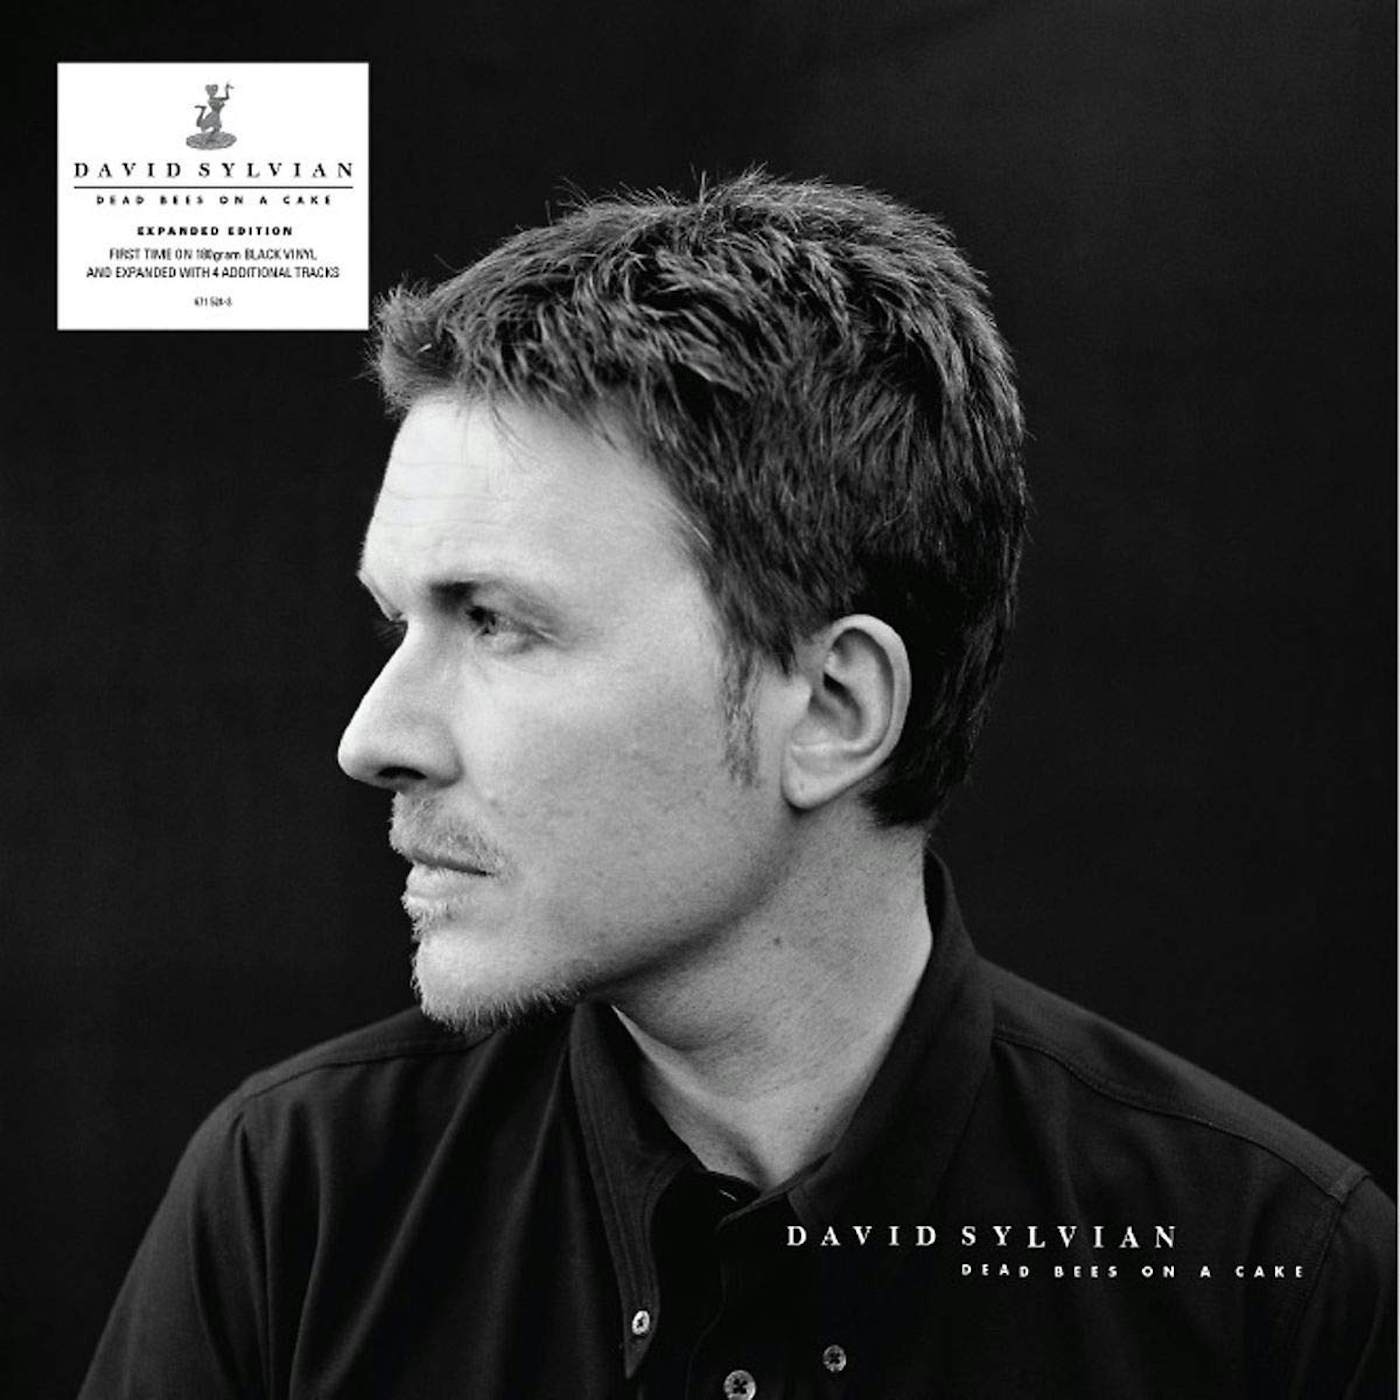 David Sylvian - Dead Bees On A Cake Expanded Edition